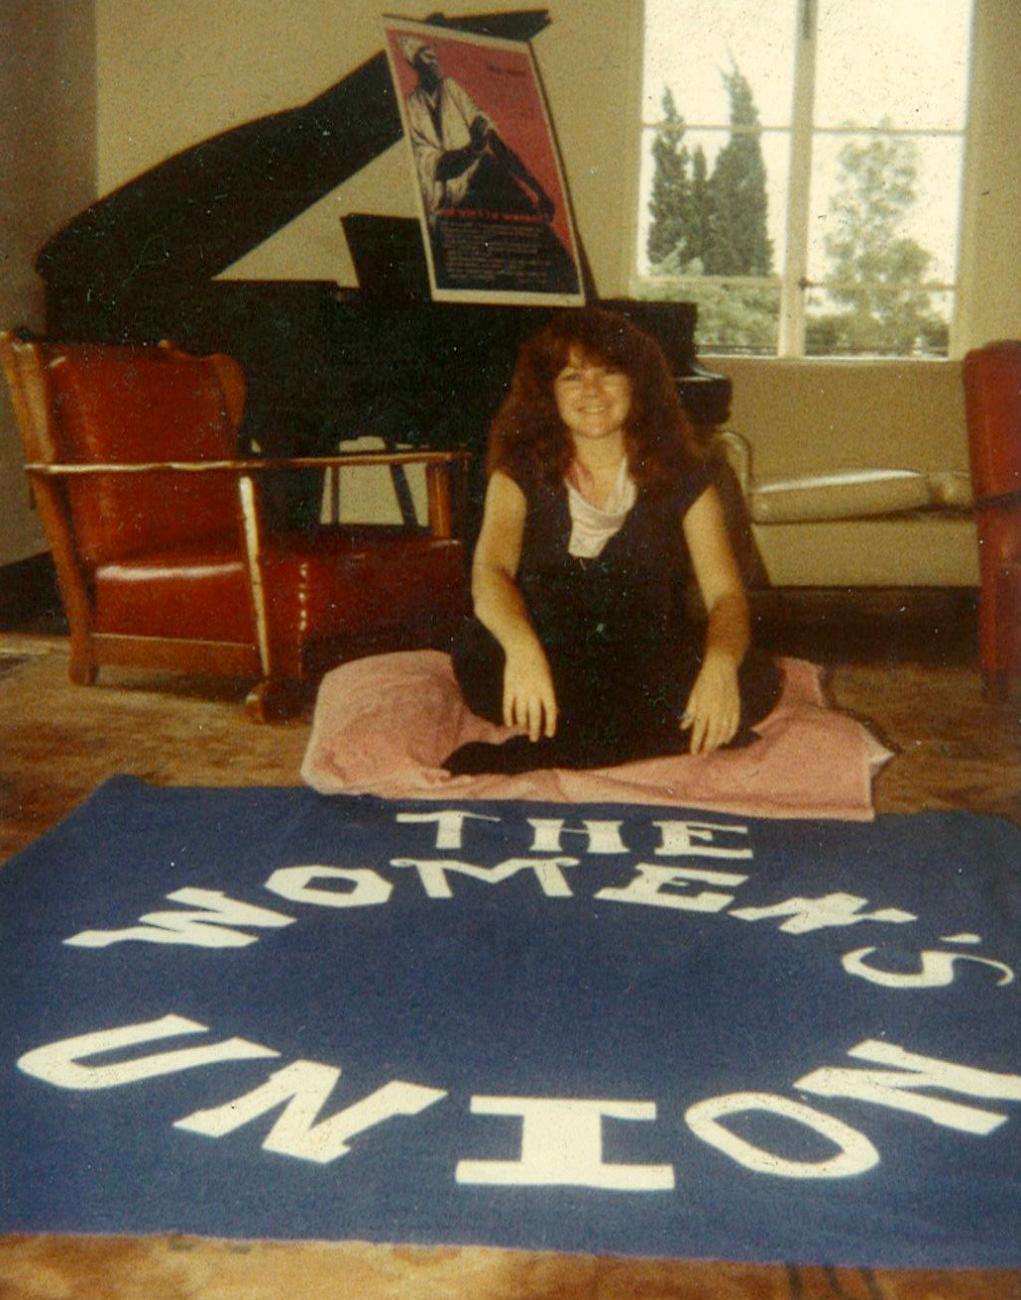 Colleen O'Neil with Women's Union banner